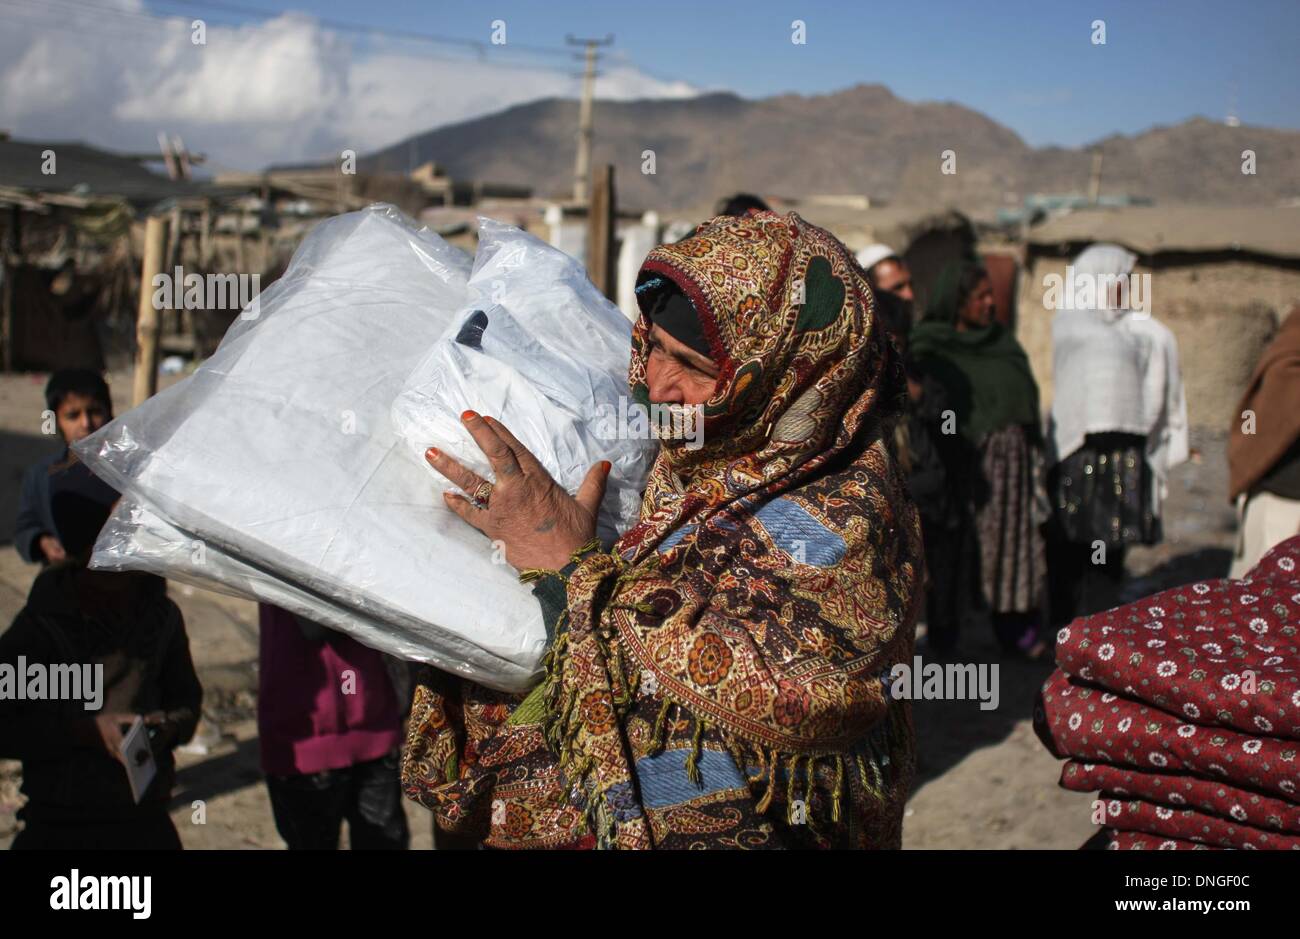 Kabul, Afghanistan. 28th Dec, 2013. An Afghan woman carries winter relief supplies donated by German government for displaced people in Kabul, Afghanistan, Dec. 28, 2013. © Ahmad Massoud/Xinhua/Alamy Live News Stock Photo